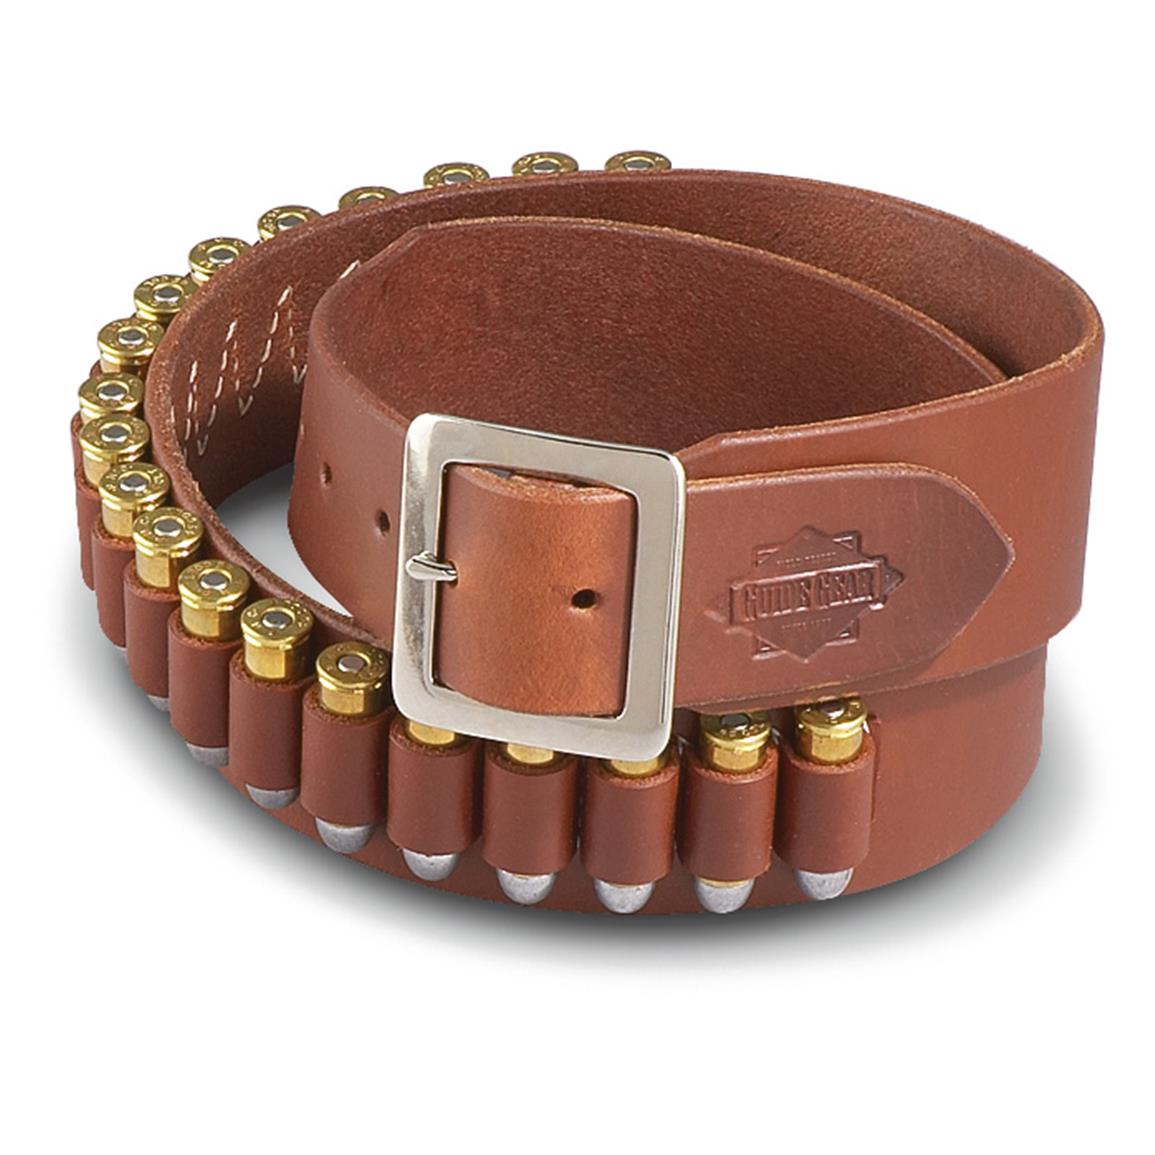 Guide Gear Leather Cartridge Belt 38 Special 357 Magnum Belts Accessories At Sportsman S Guide